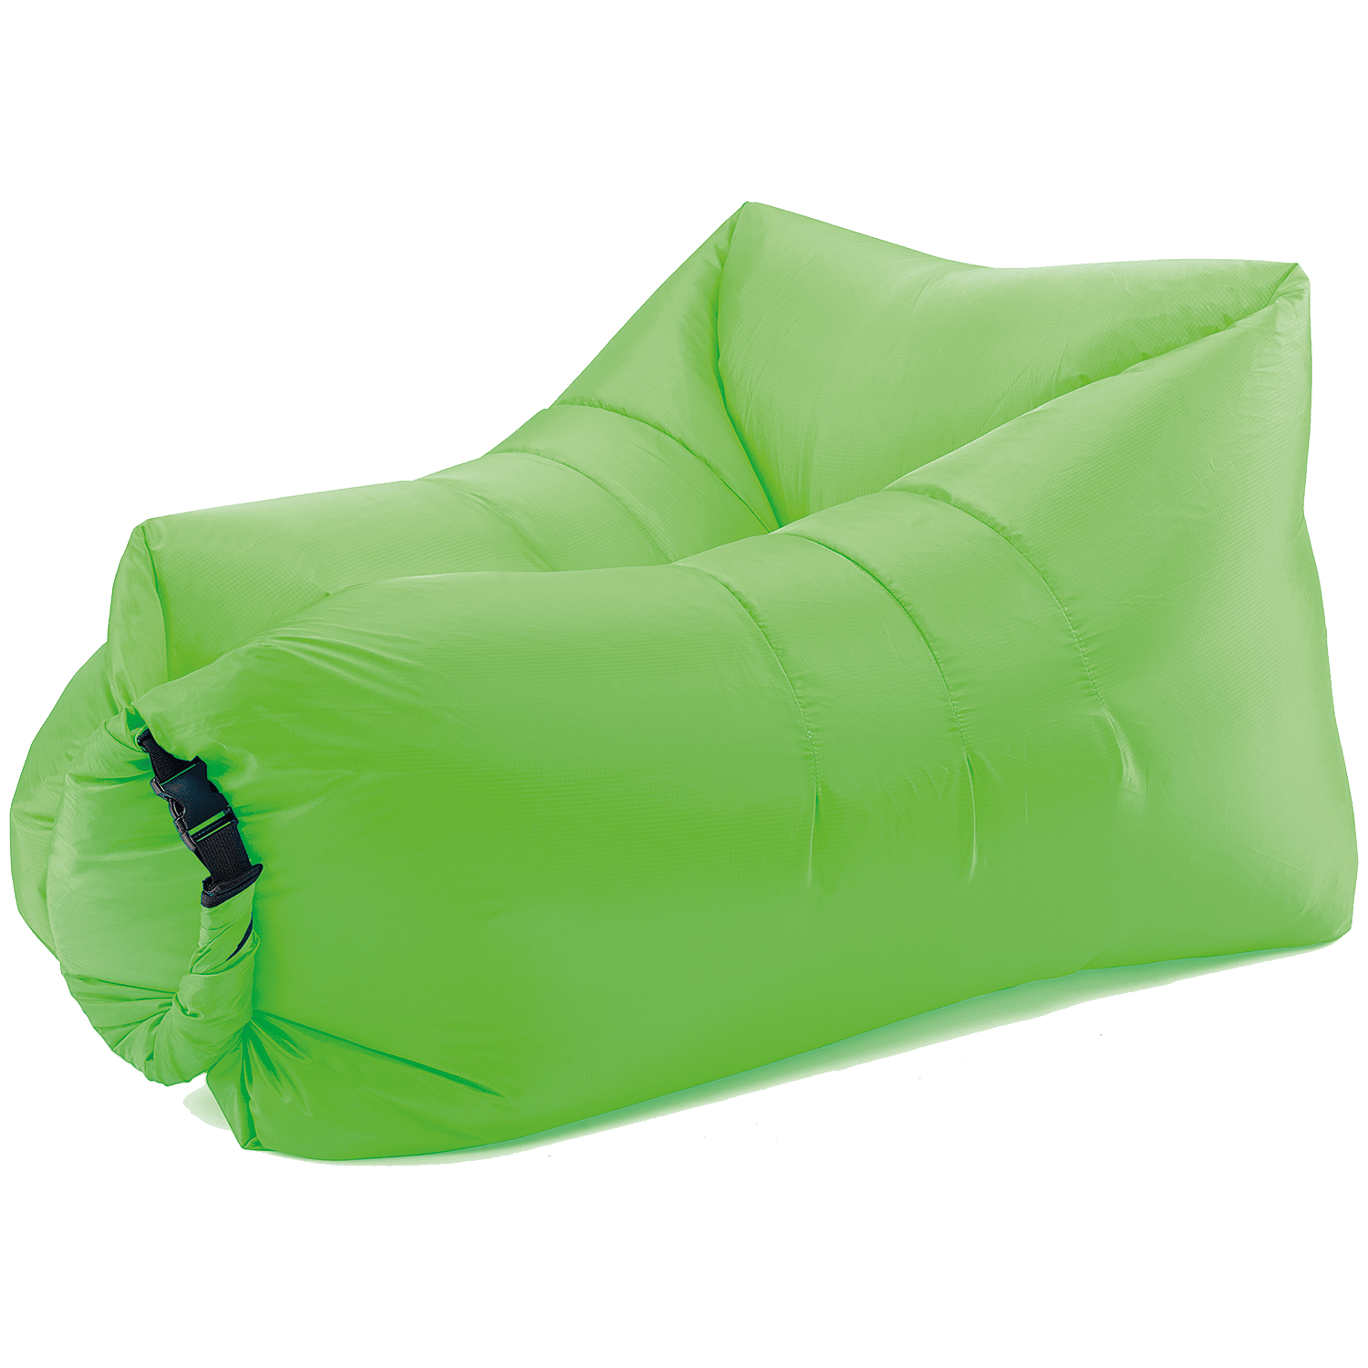 froyak airlounger action com